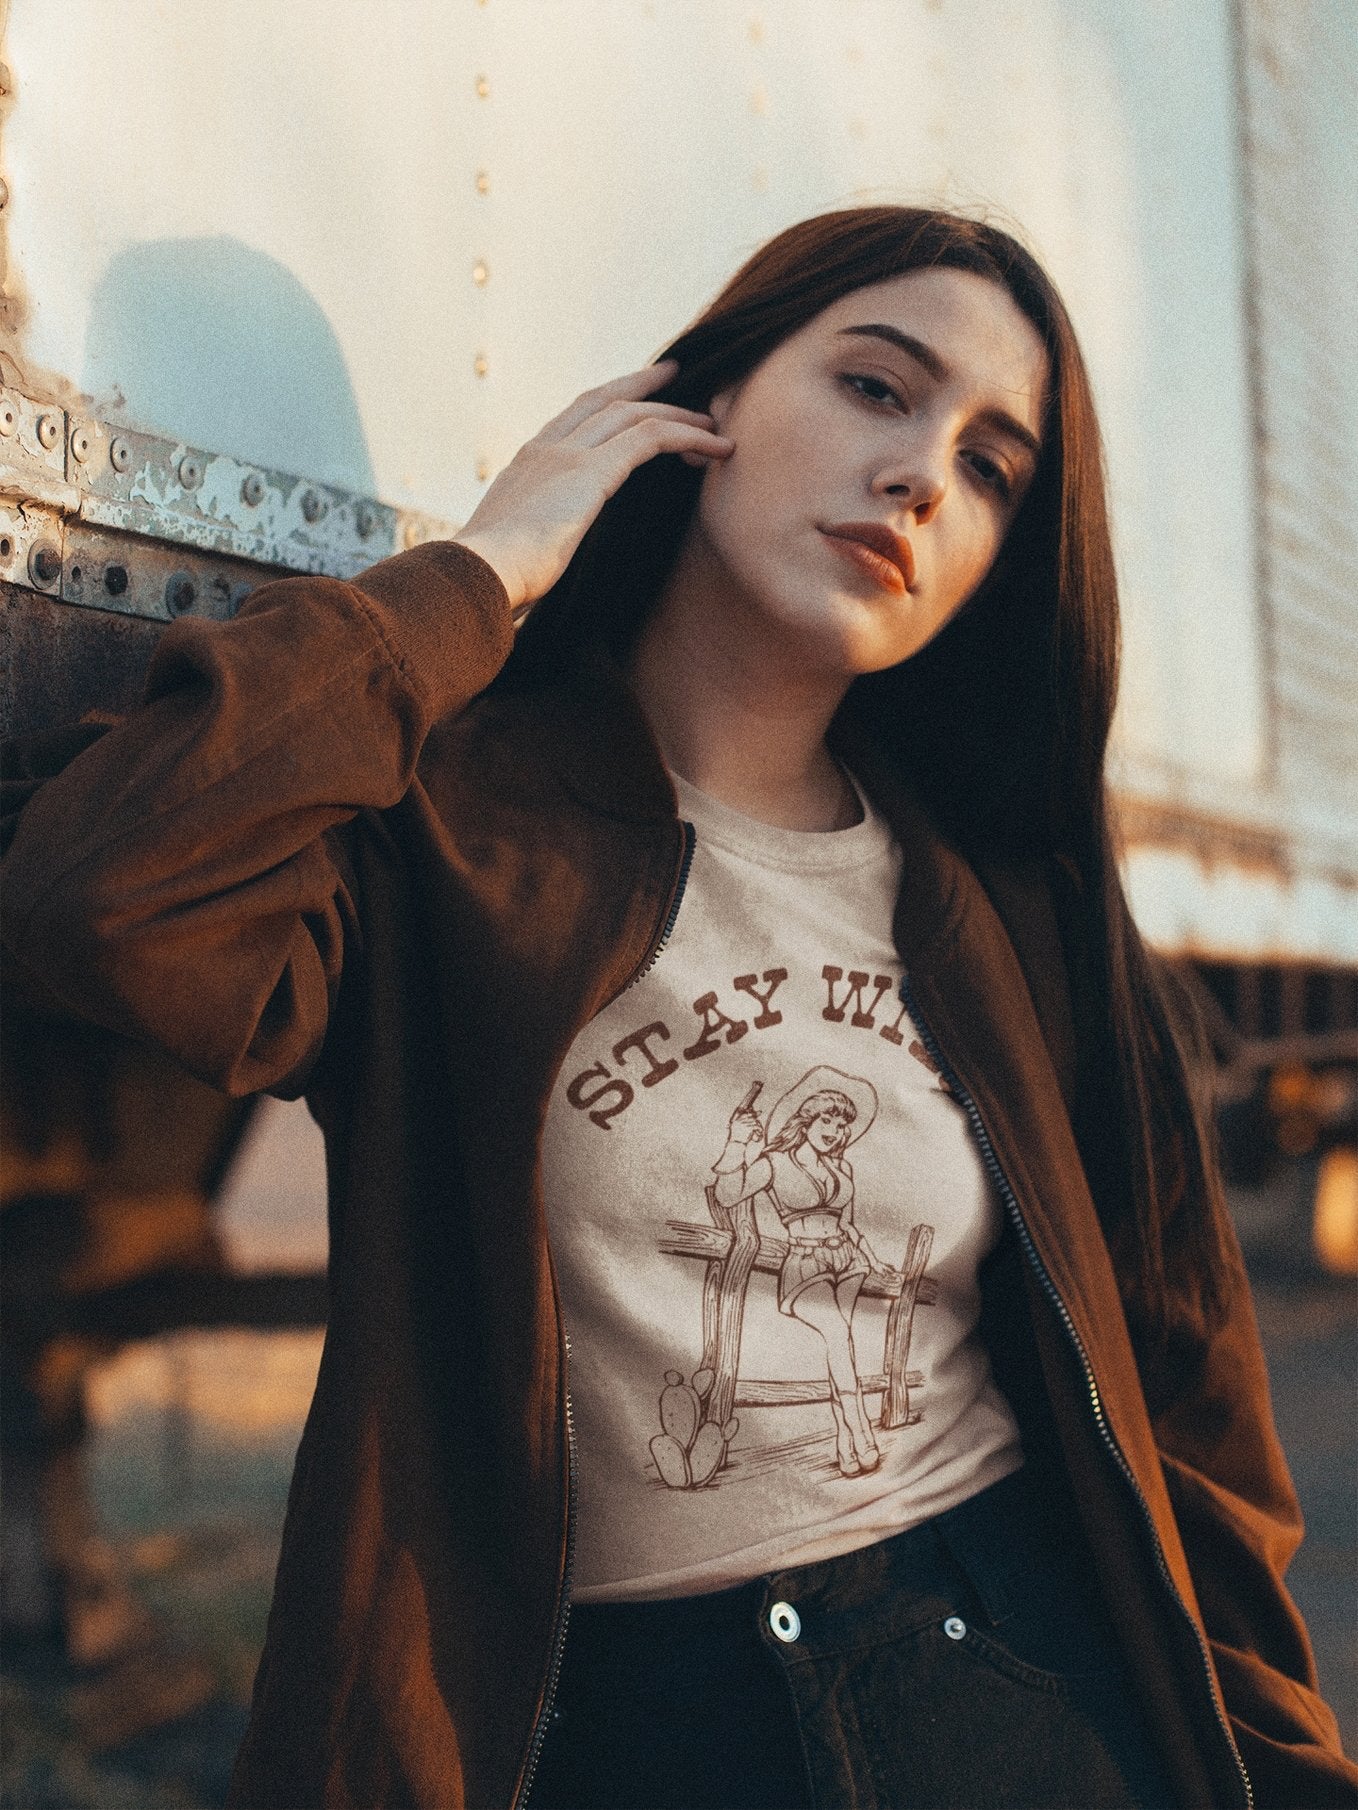 Stay Wild Cowgirl Graphic TeeBeigeS